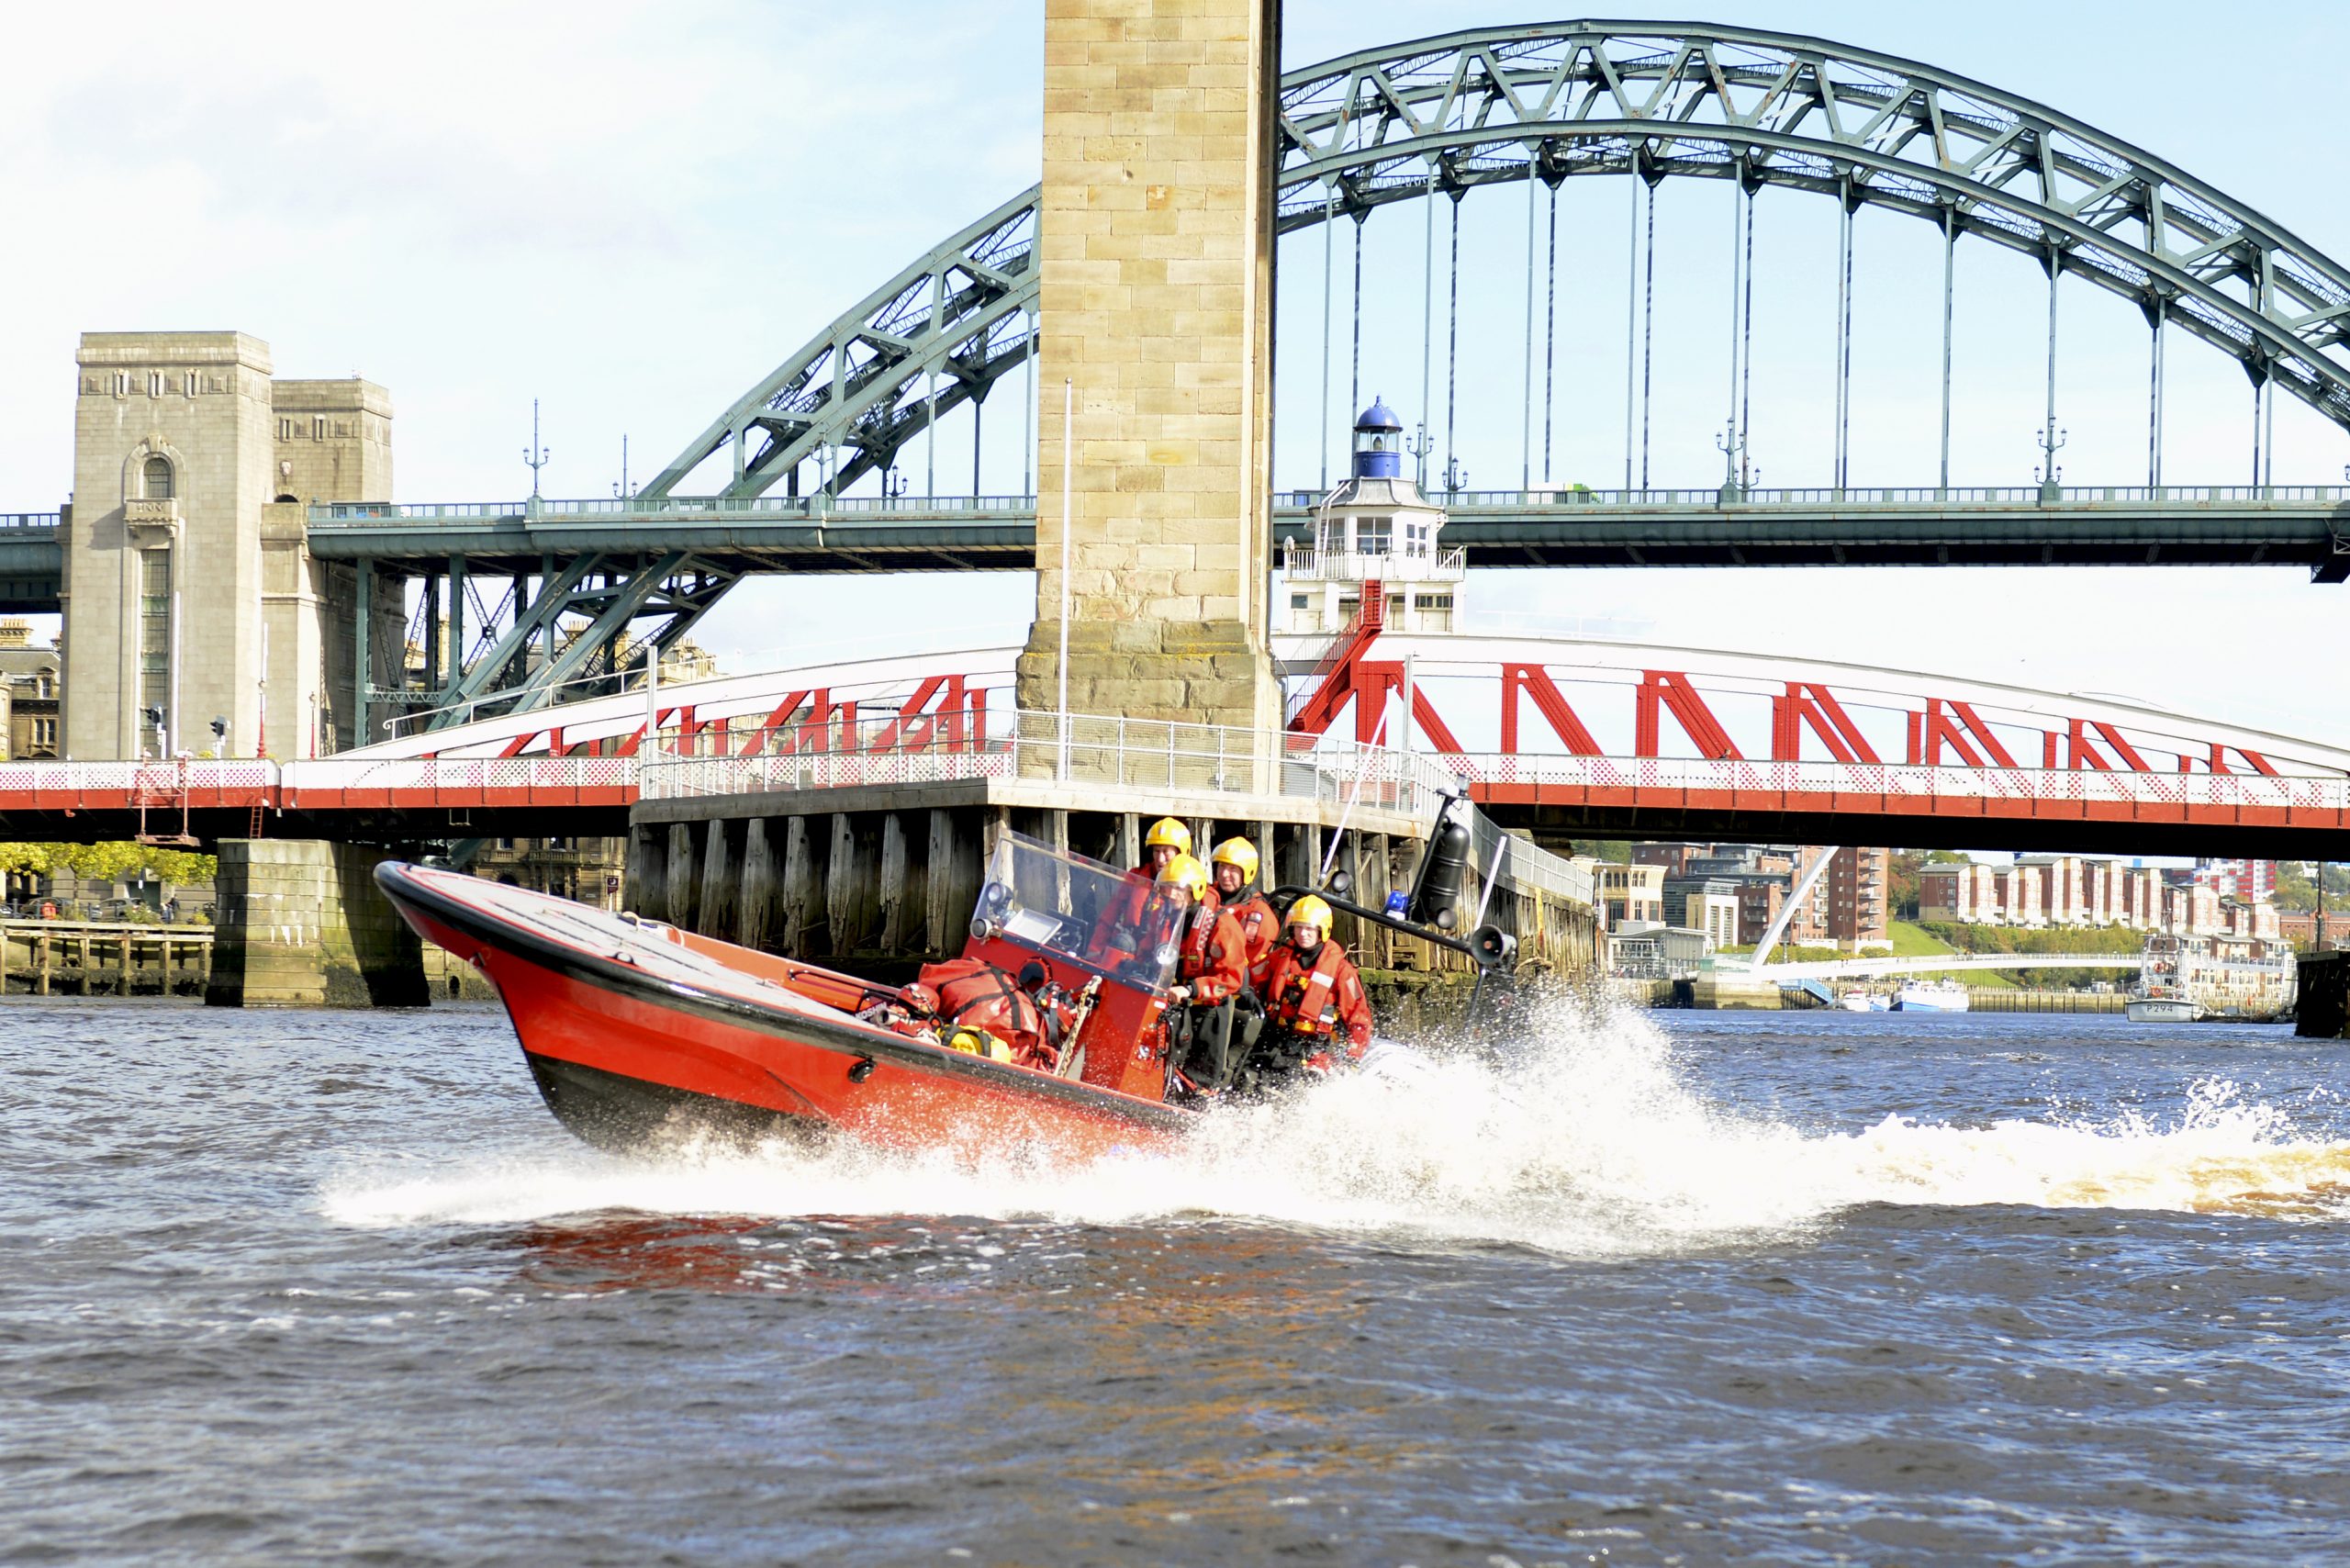 TWFRS Fire Boat pictured on the River Tyne